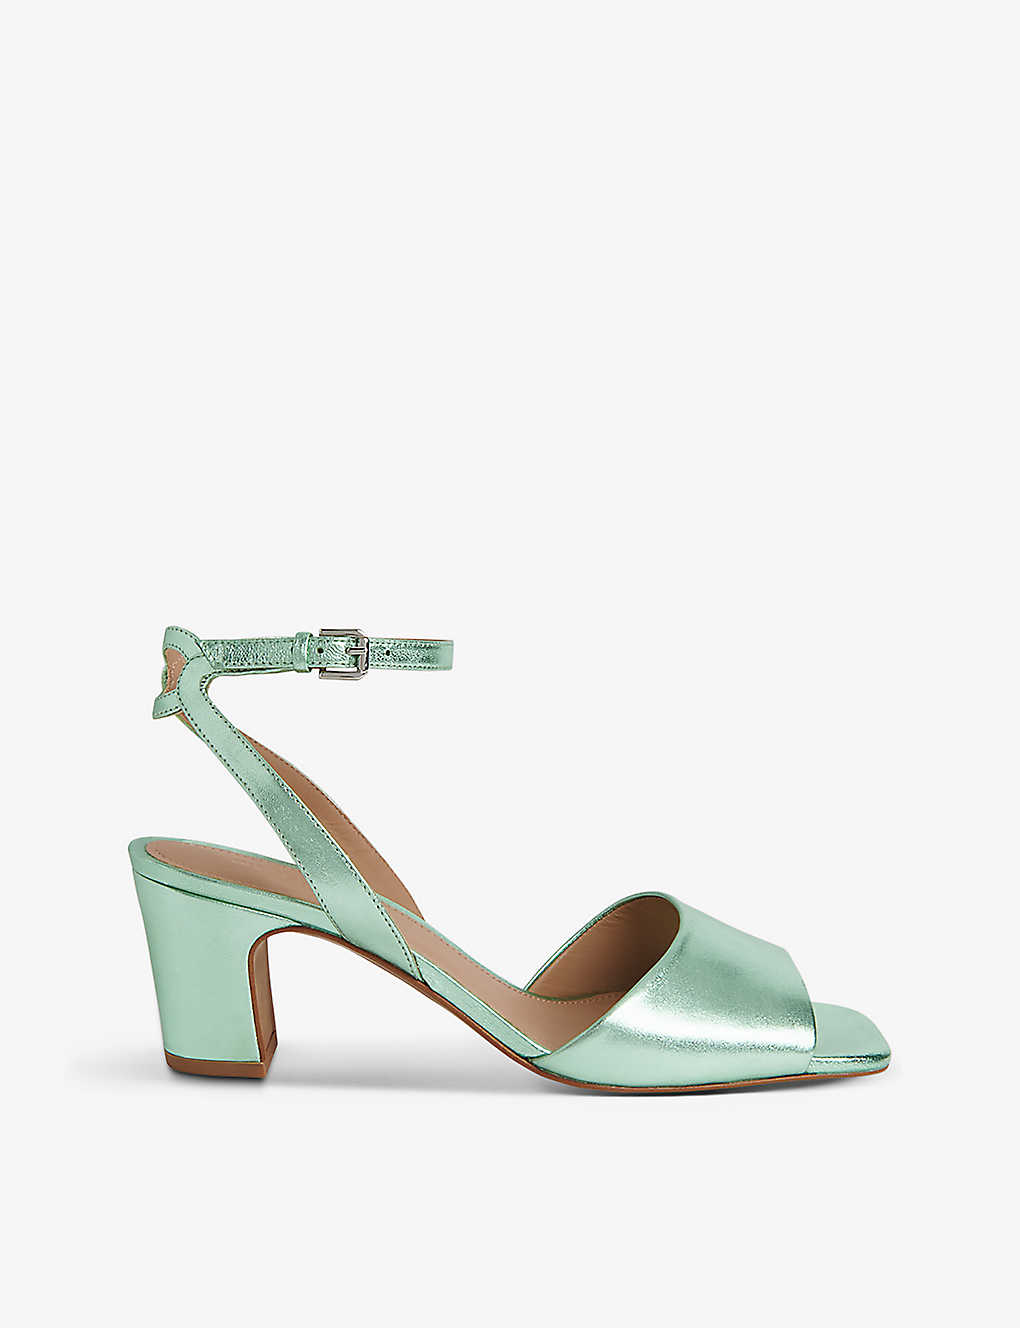 Whistles Women's Emerson Square Toe Block Heel Sandals In Green